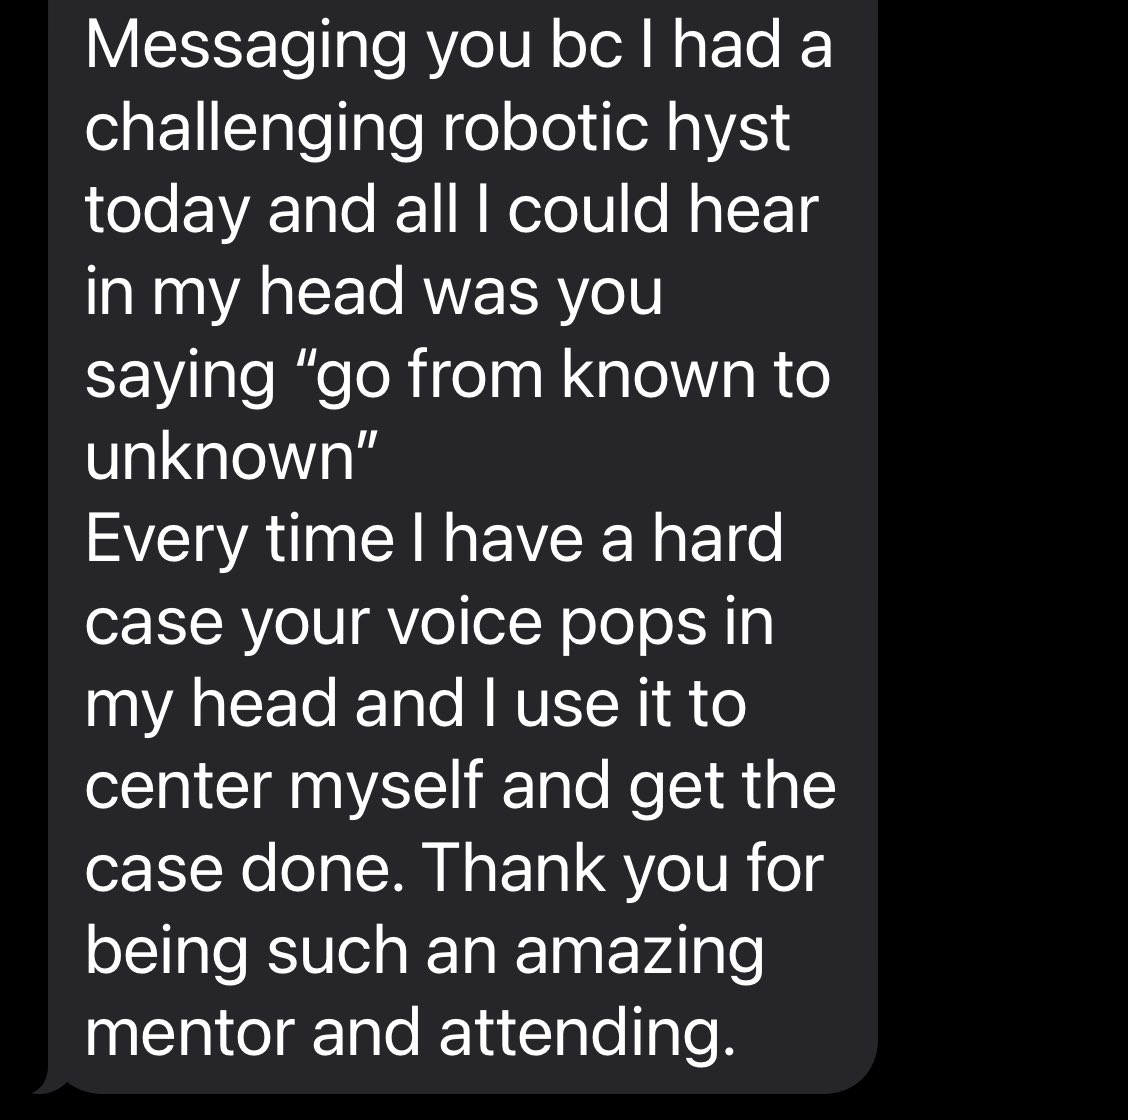 You never know how you  are going to impact your #obgyn #residents and fellows. Build them up💪🏽
#mentoringmatters
#minoritiesinmedicine